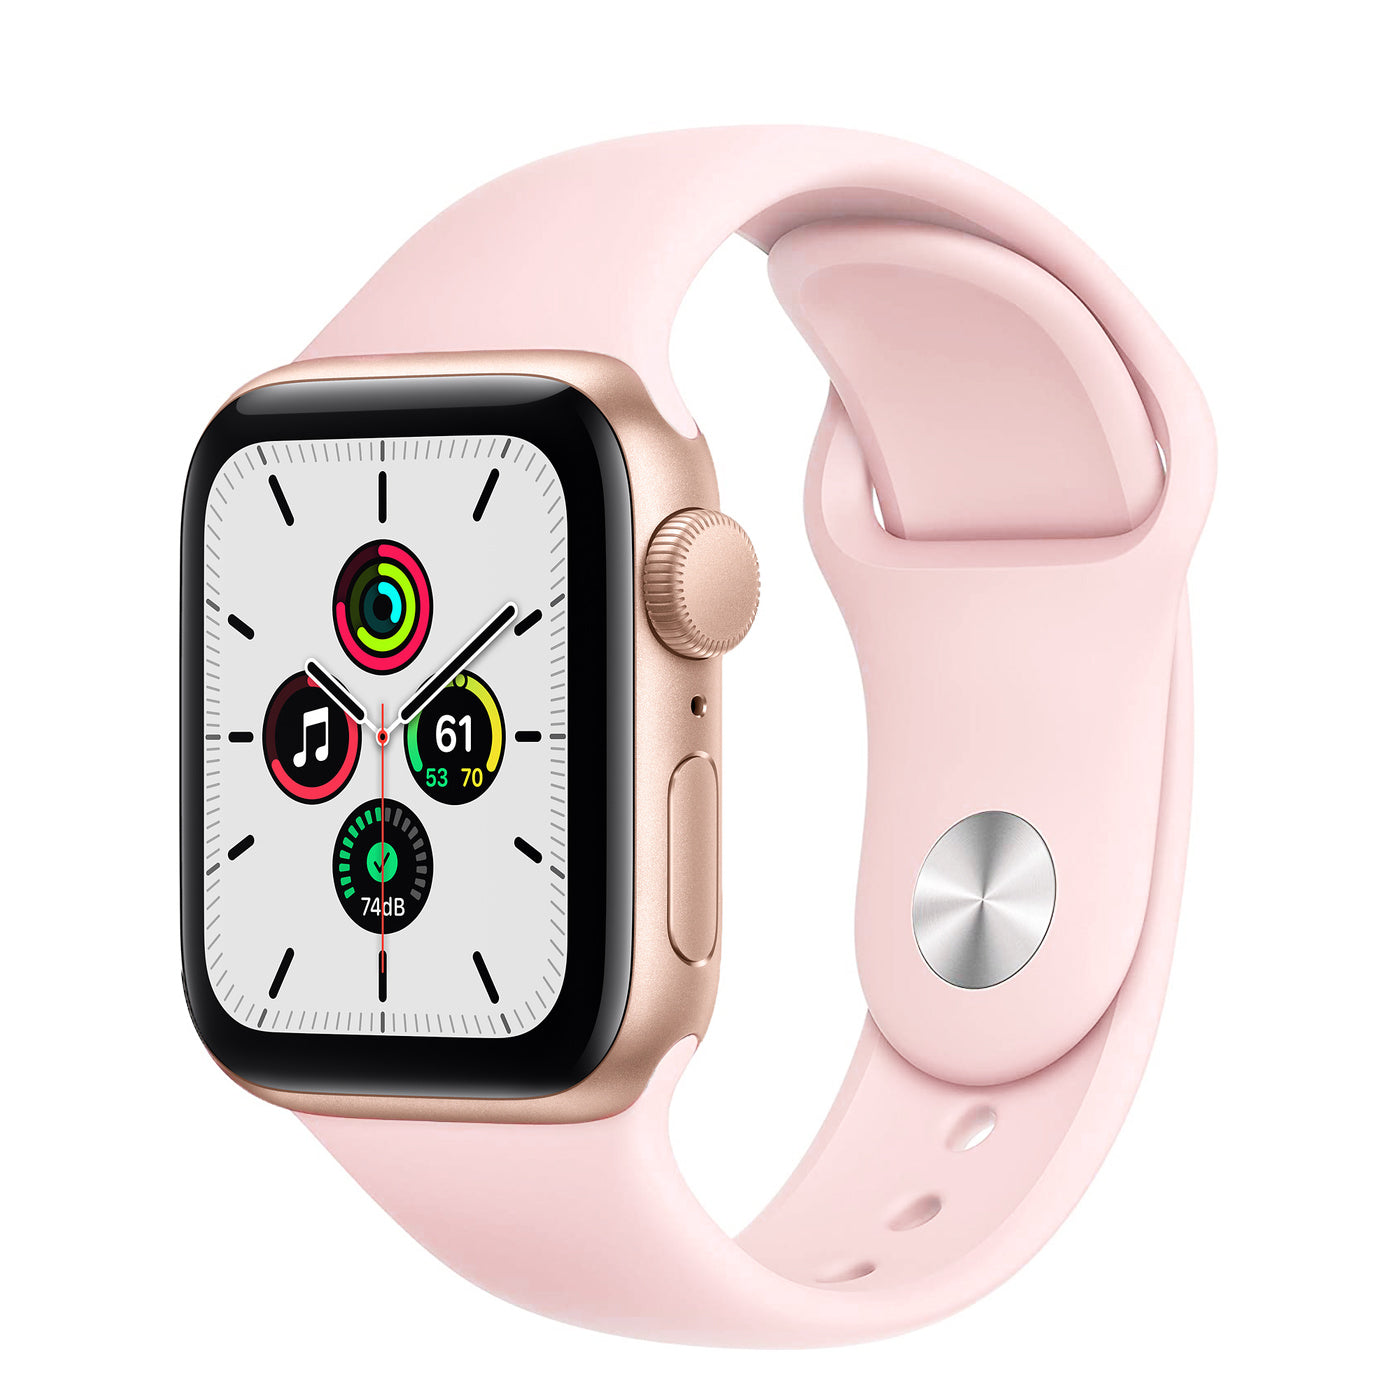 Buy Apple Watch Series 5 - 40mm GPS (STD) - Next Day Delivery